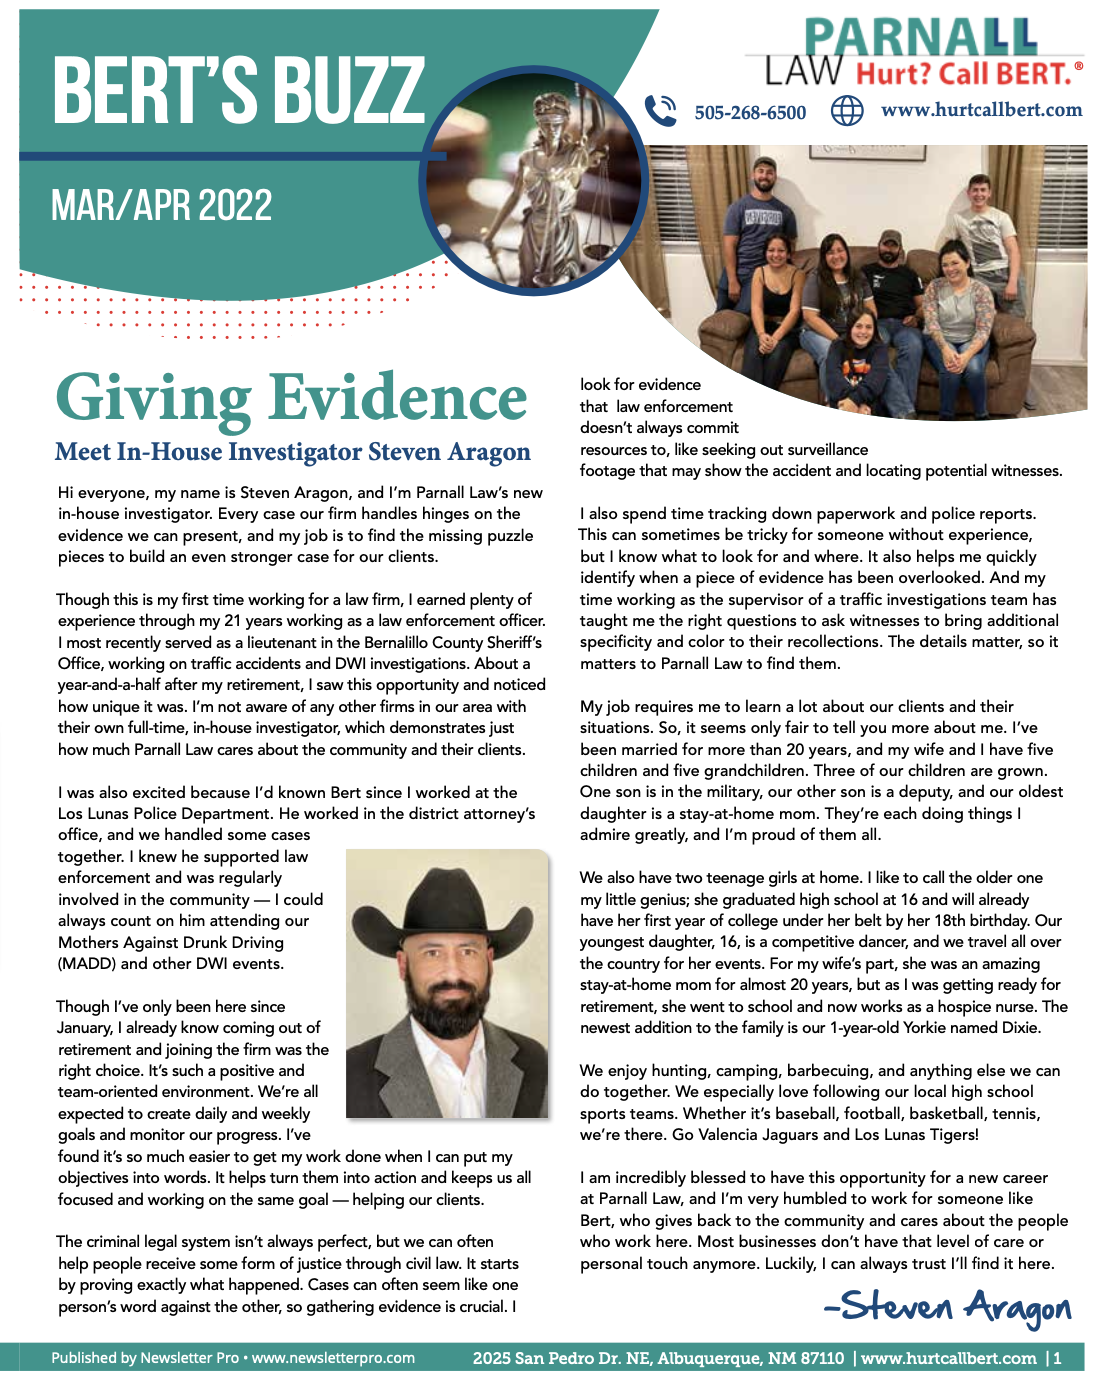 March/April 2022 newsletter